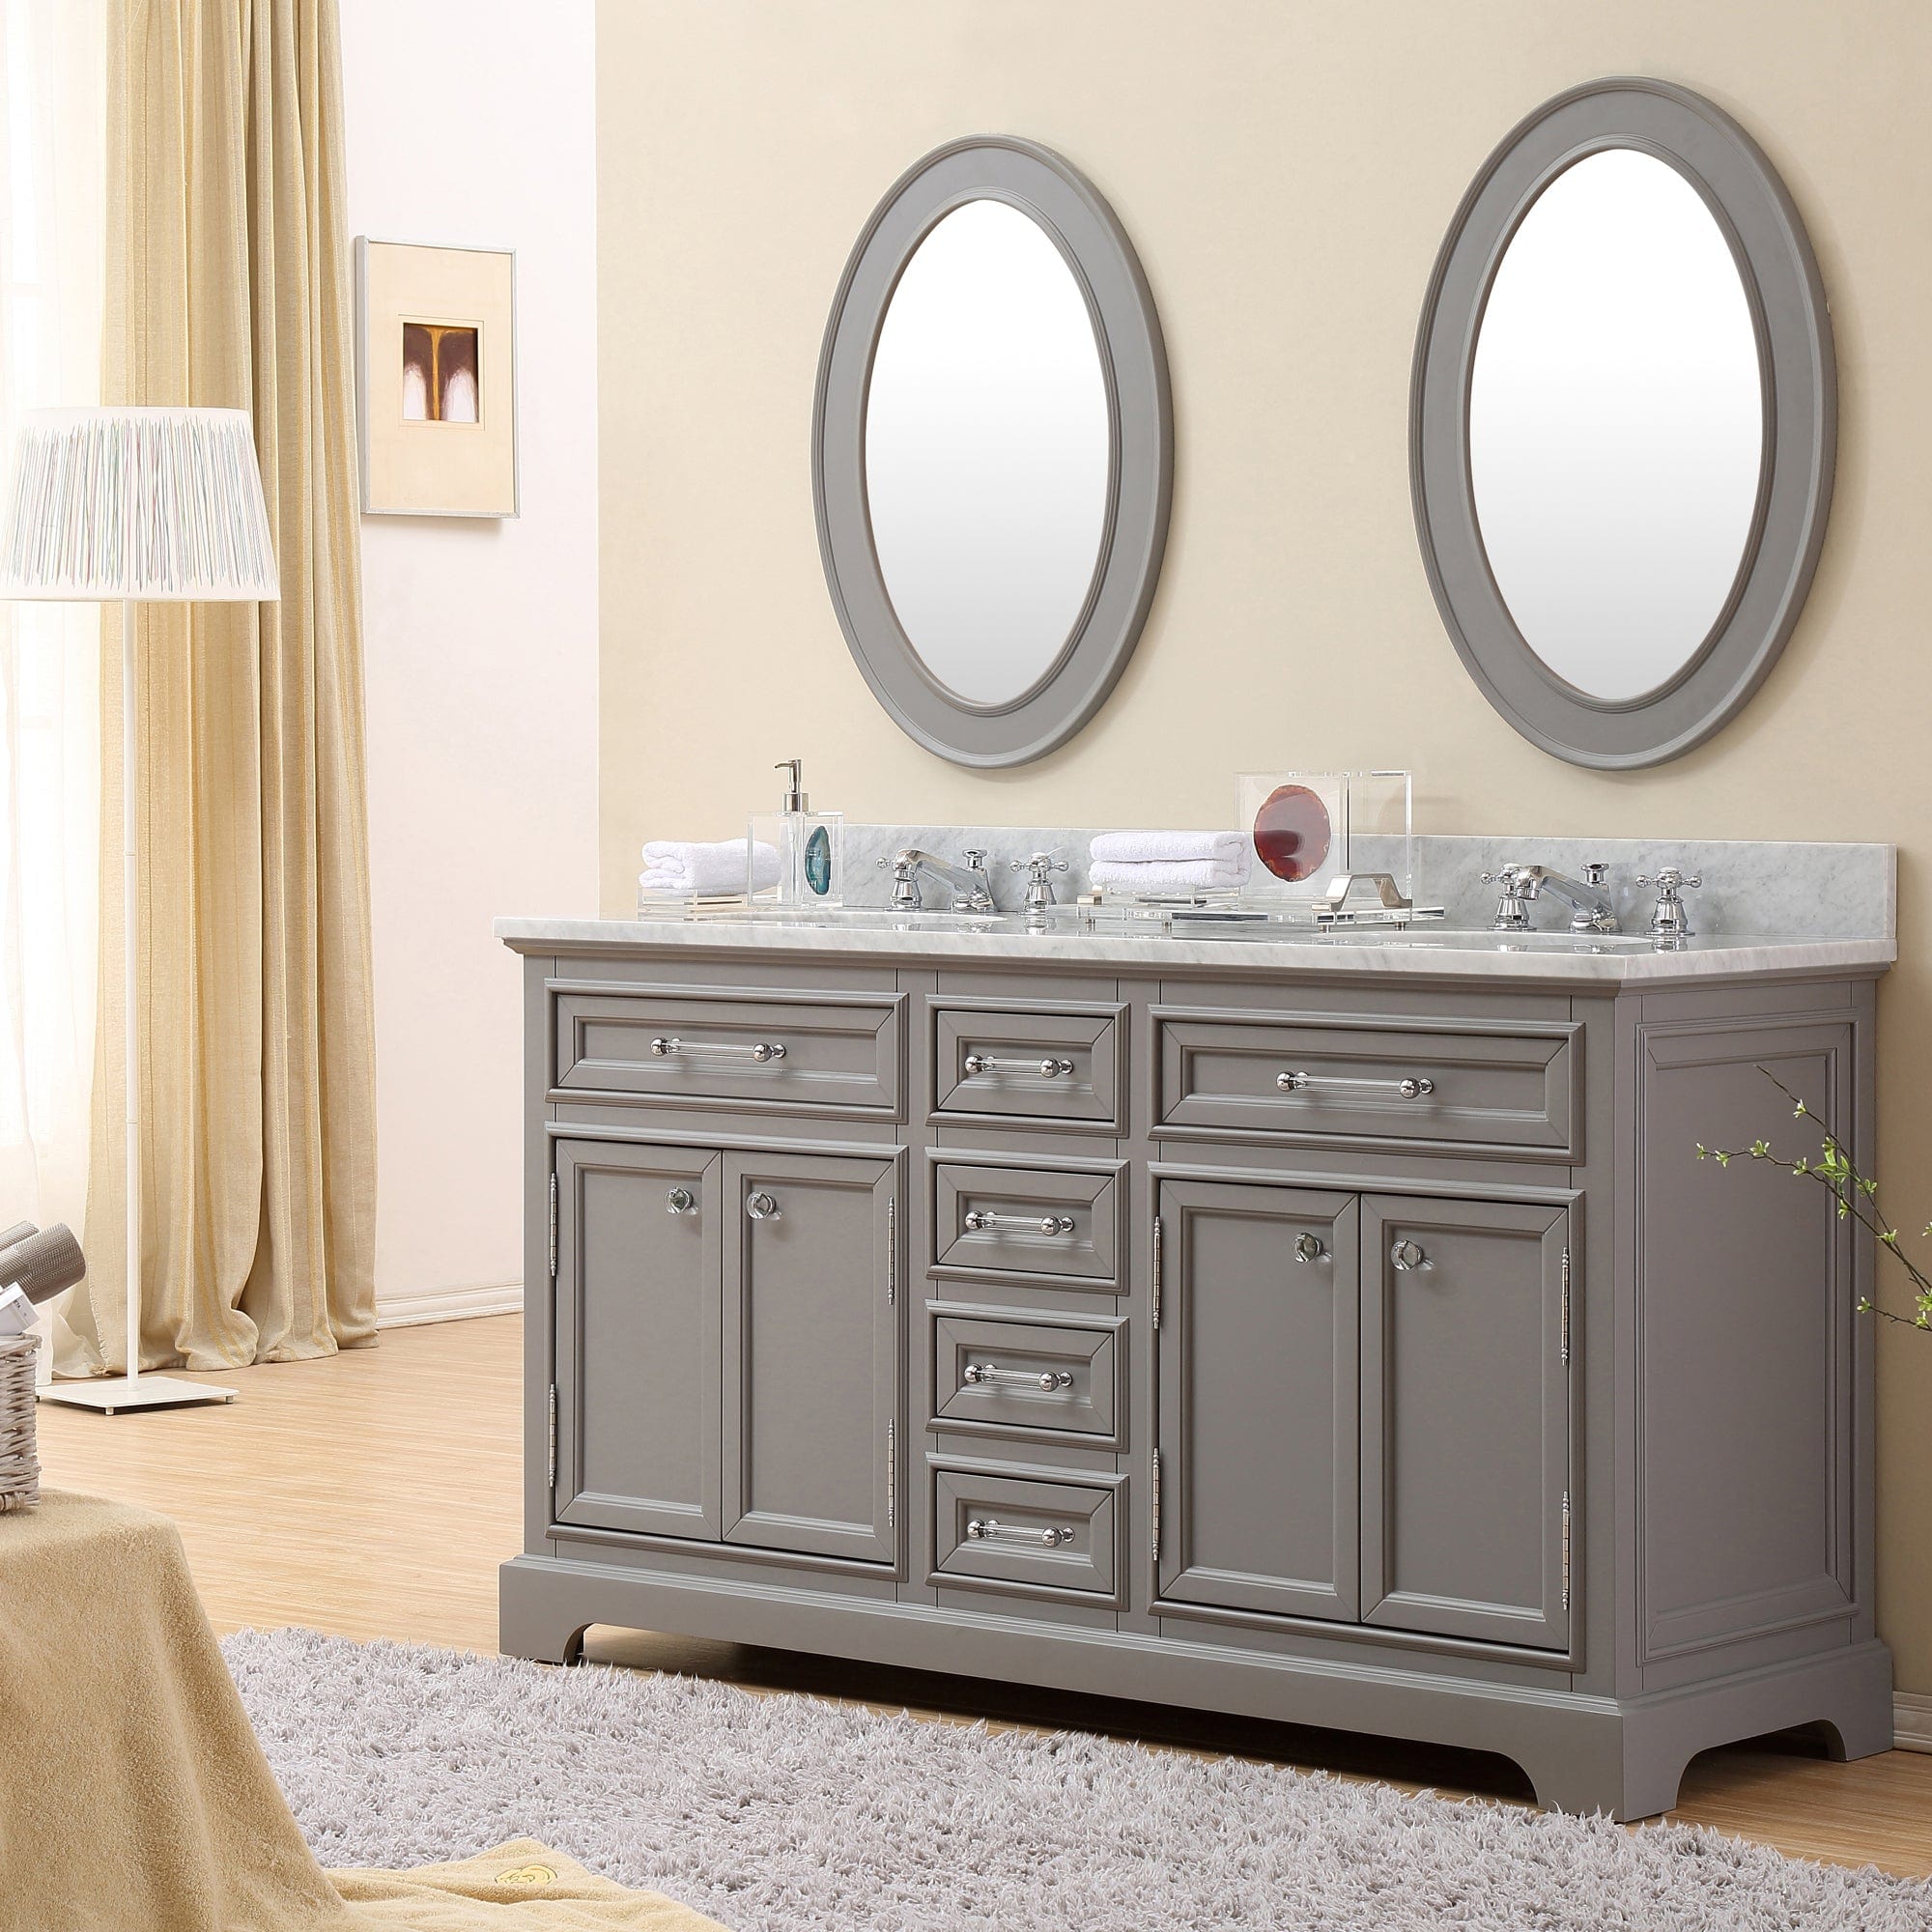 60 Inch Cashmere Grey Double Sink Bathroom Vanity From The Derby Collection - Molaix700621683070Bathroom VanitiesDE60CW01CG-000000000